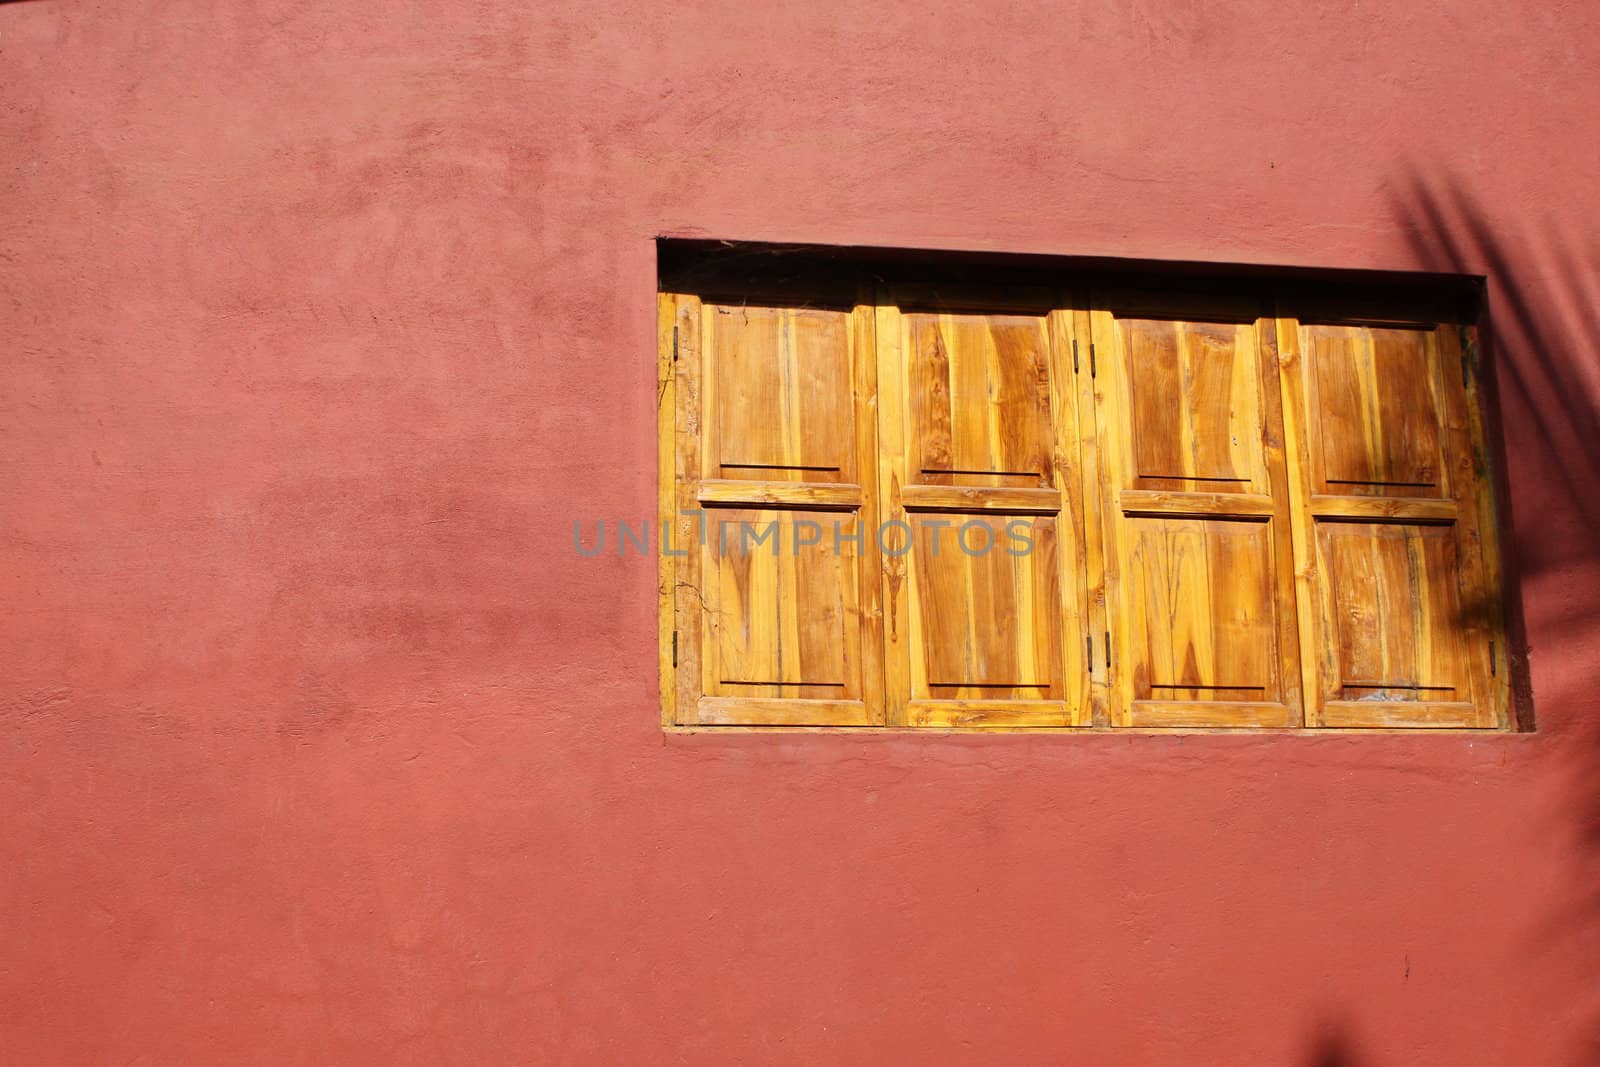 A closed wooden window on a red wall.